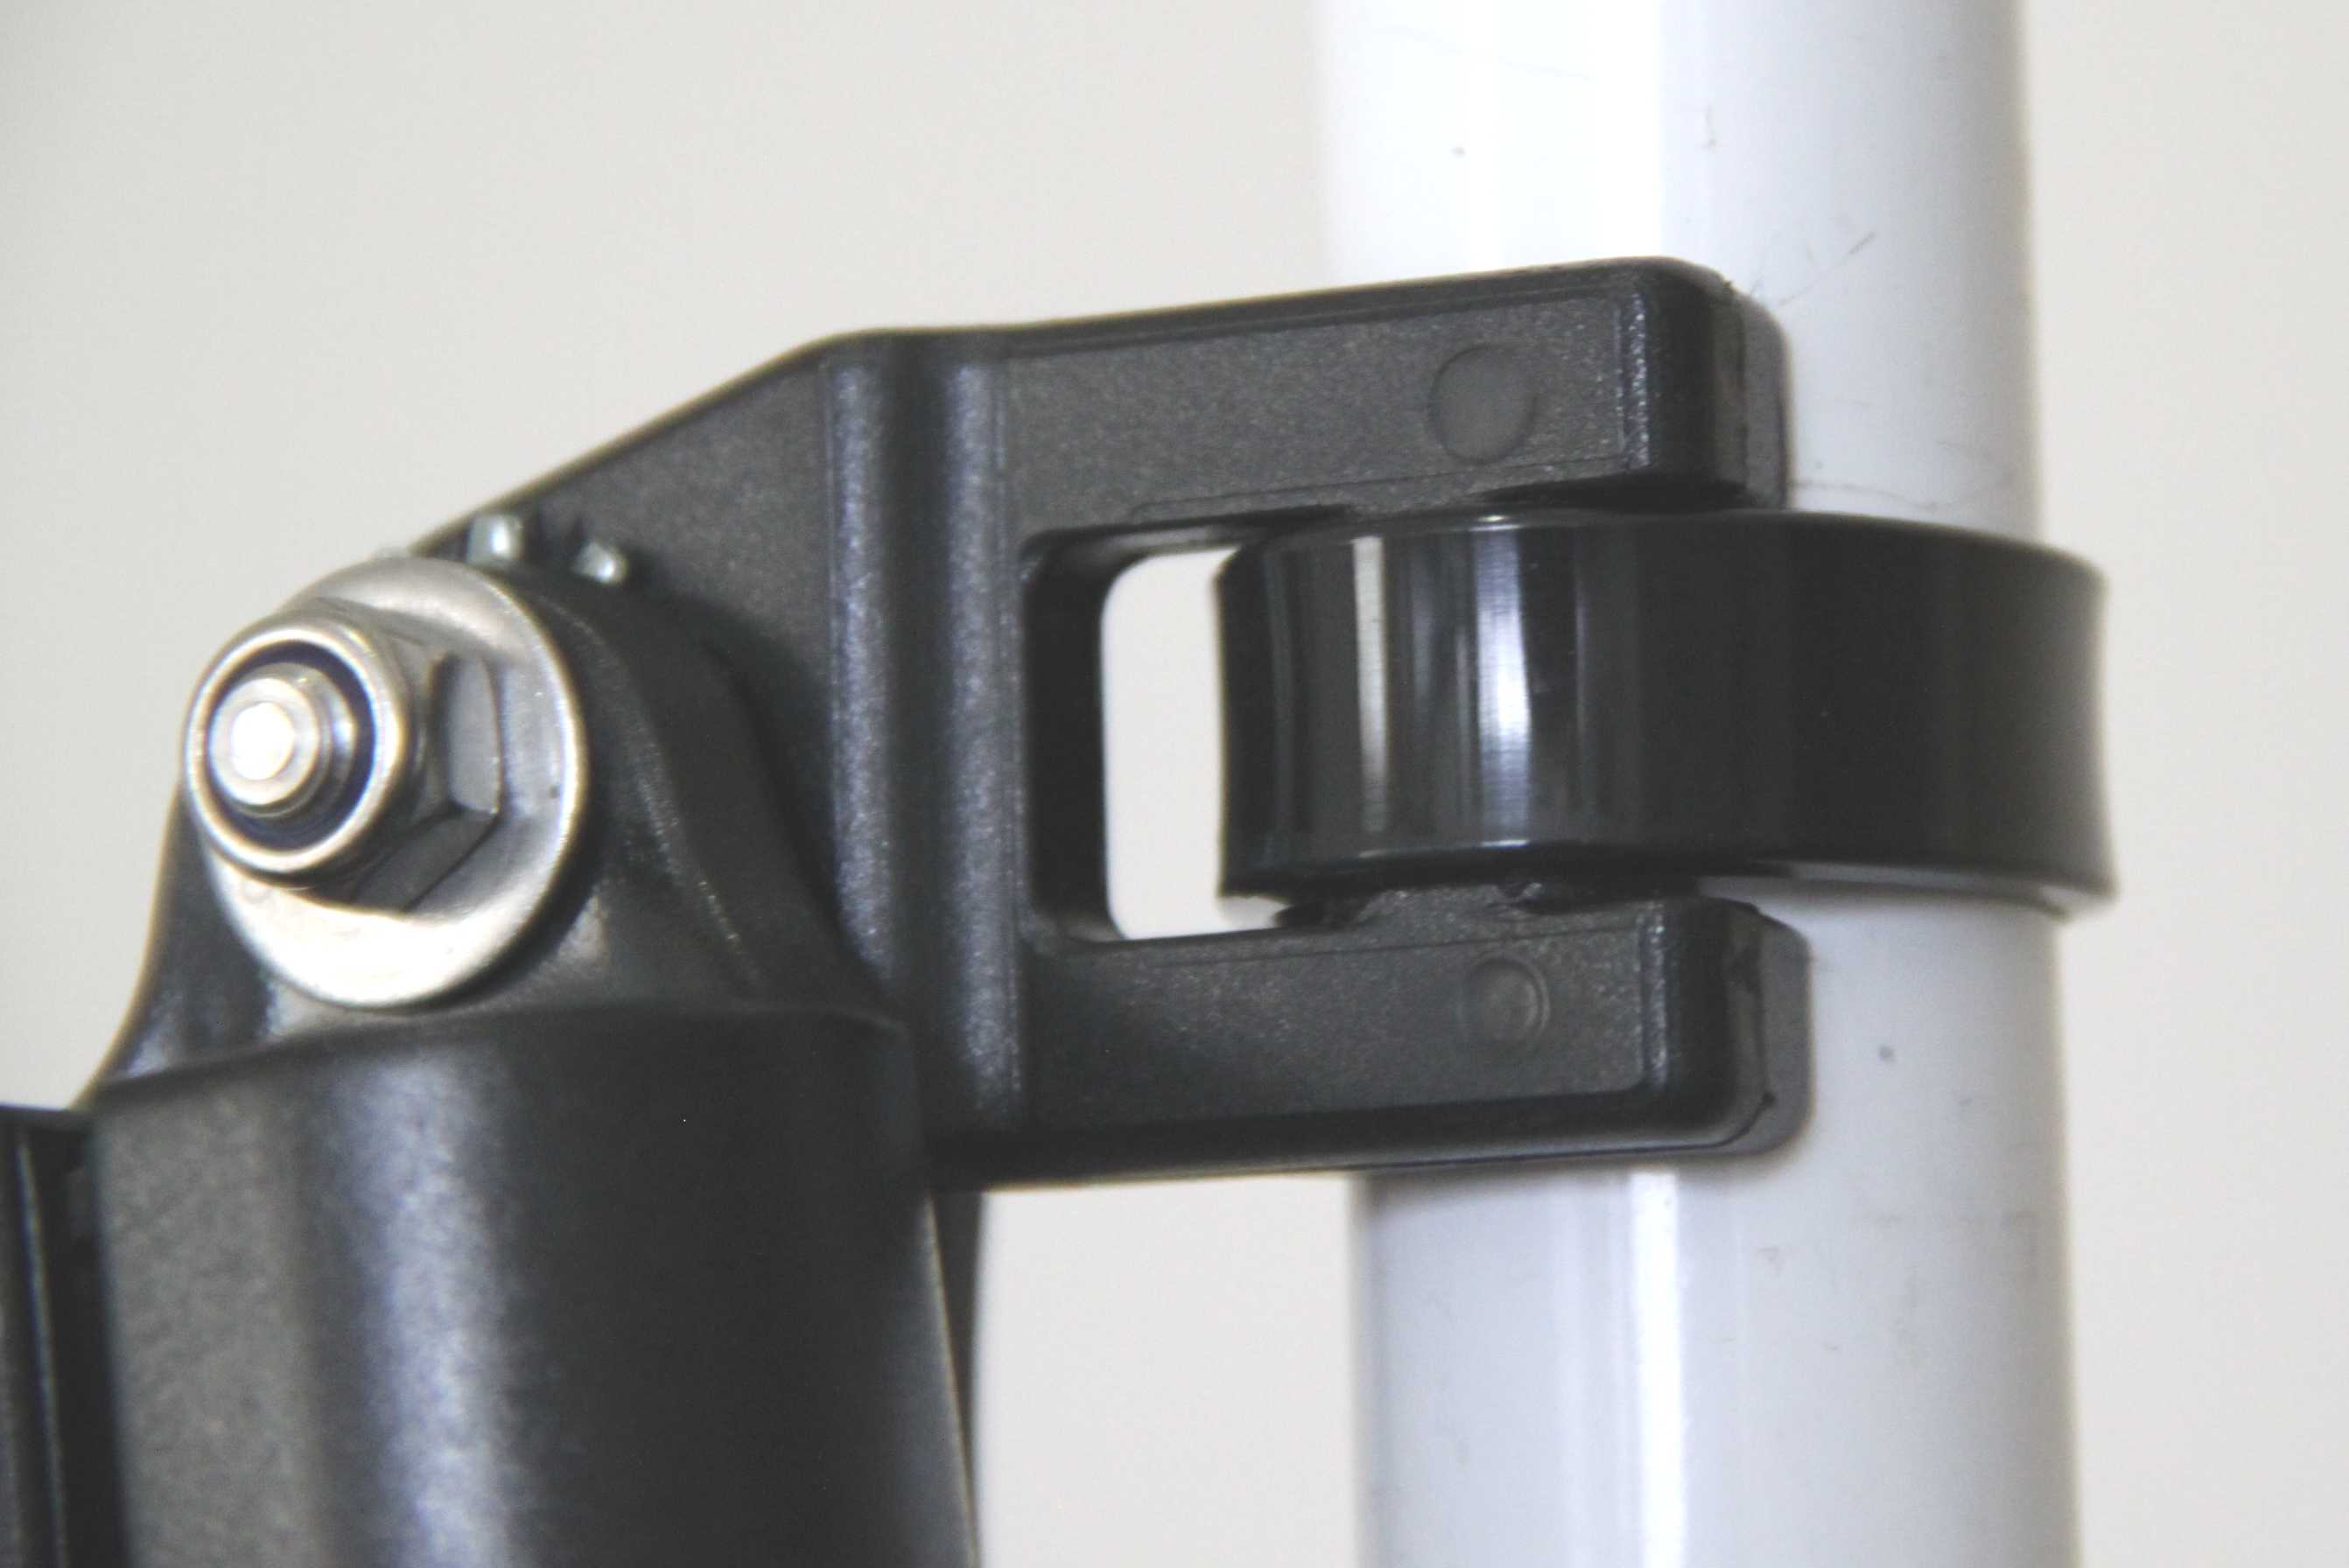 Holder attached with 12.6mm wide cable tie